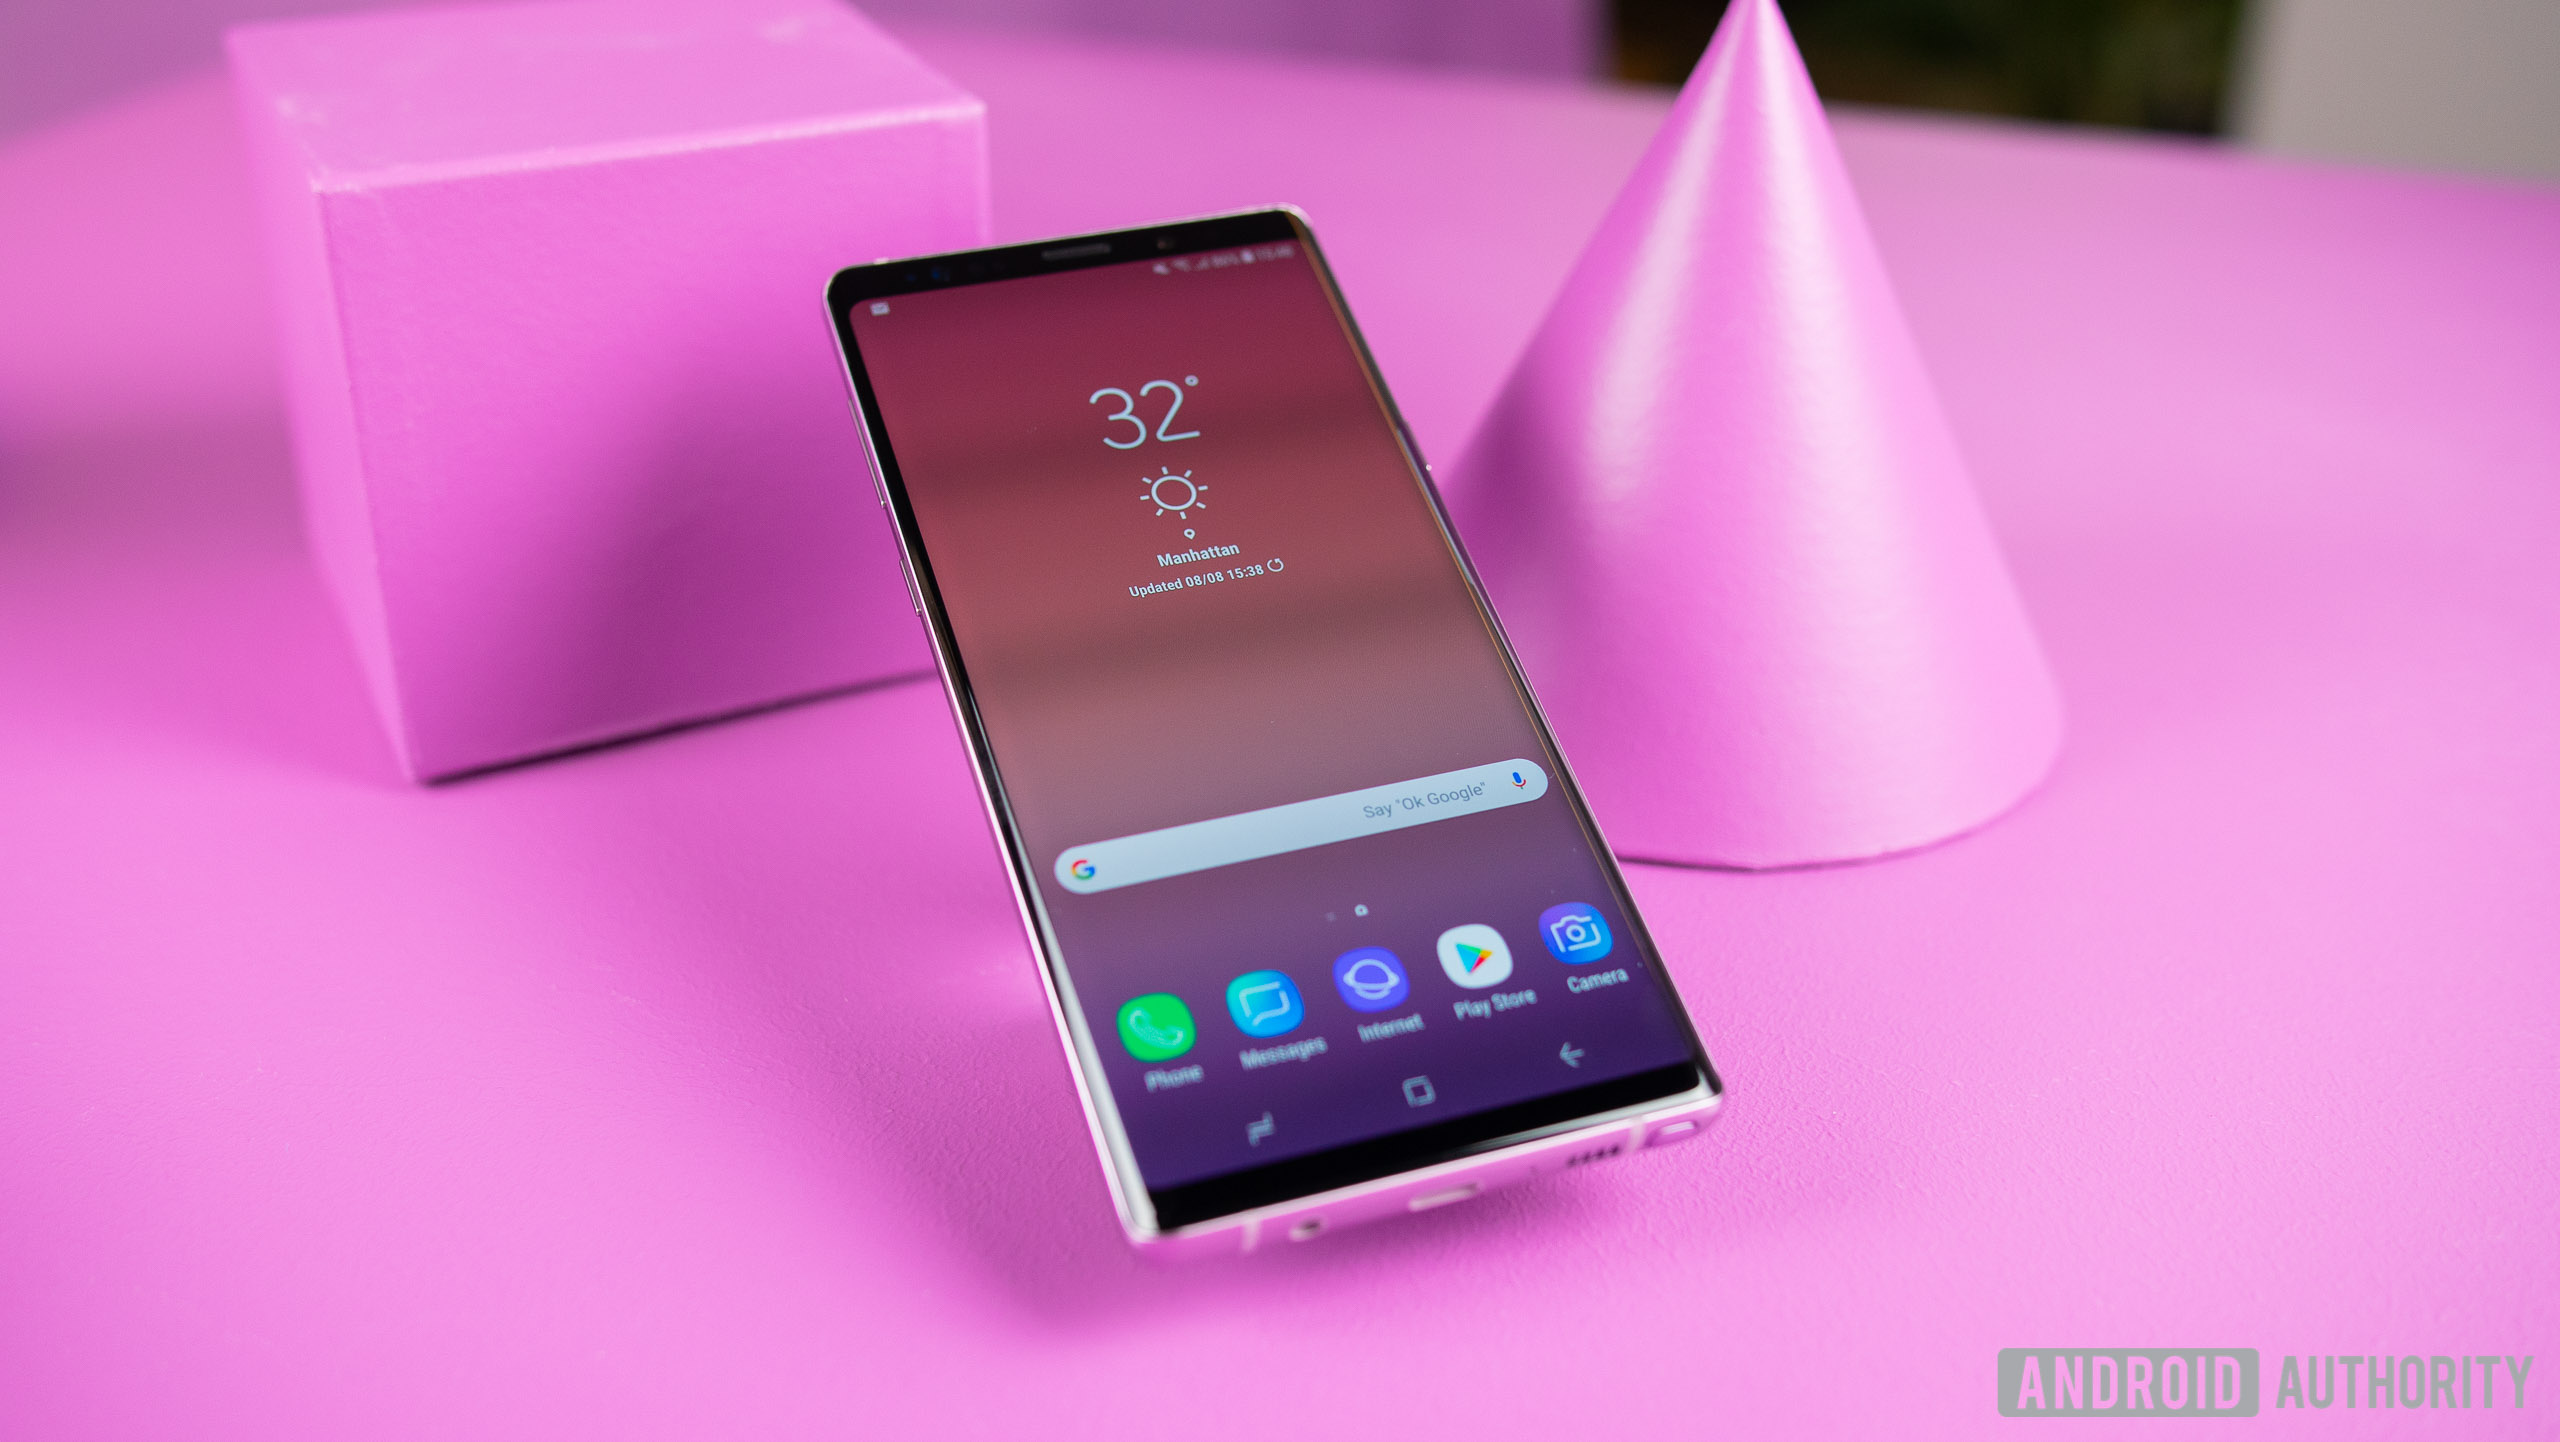 Galaxy Note 8 wallpapers: download all 13 of them here